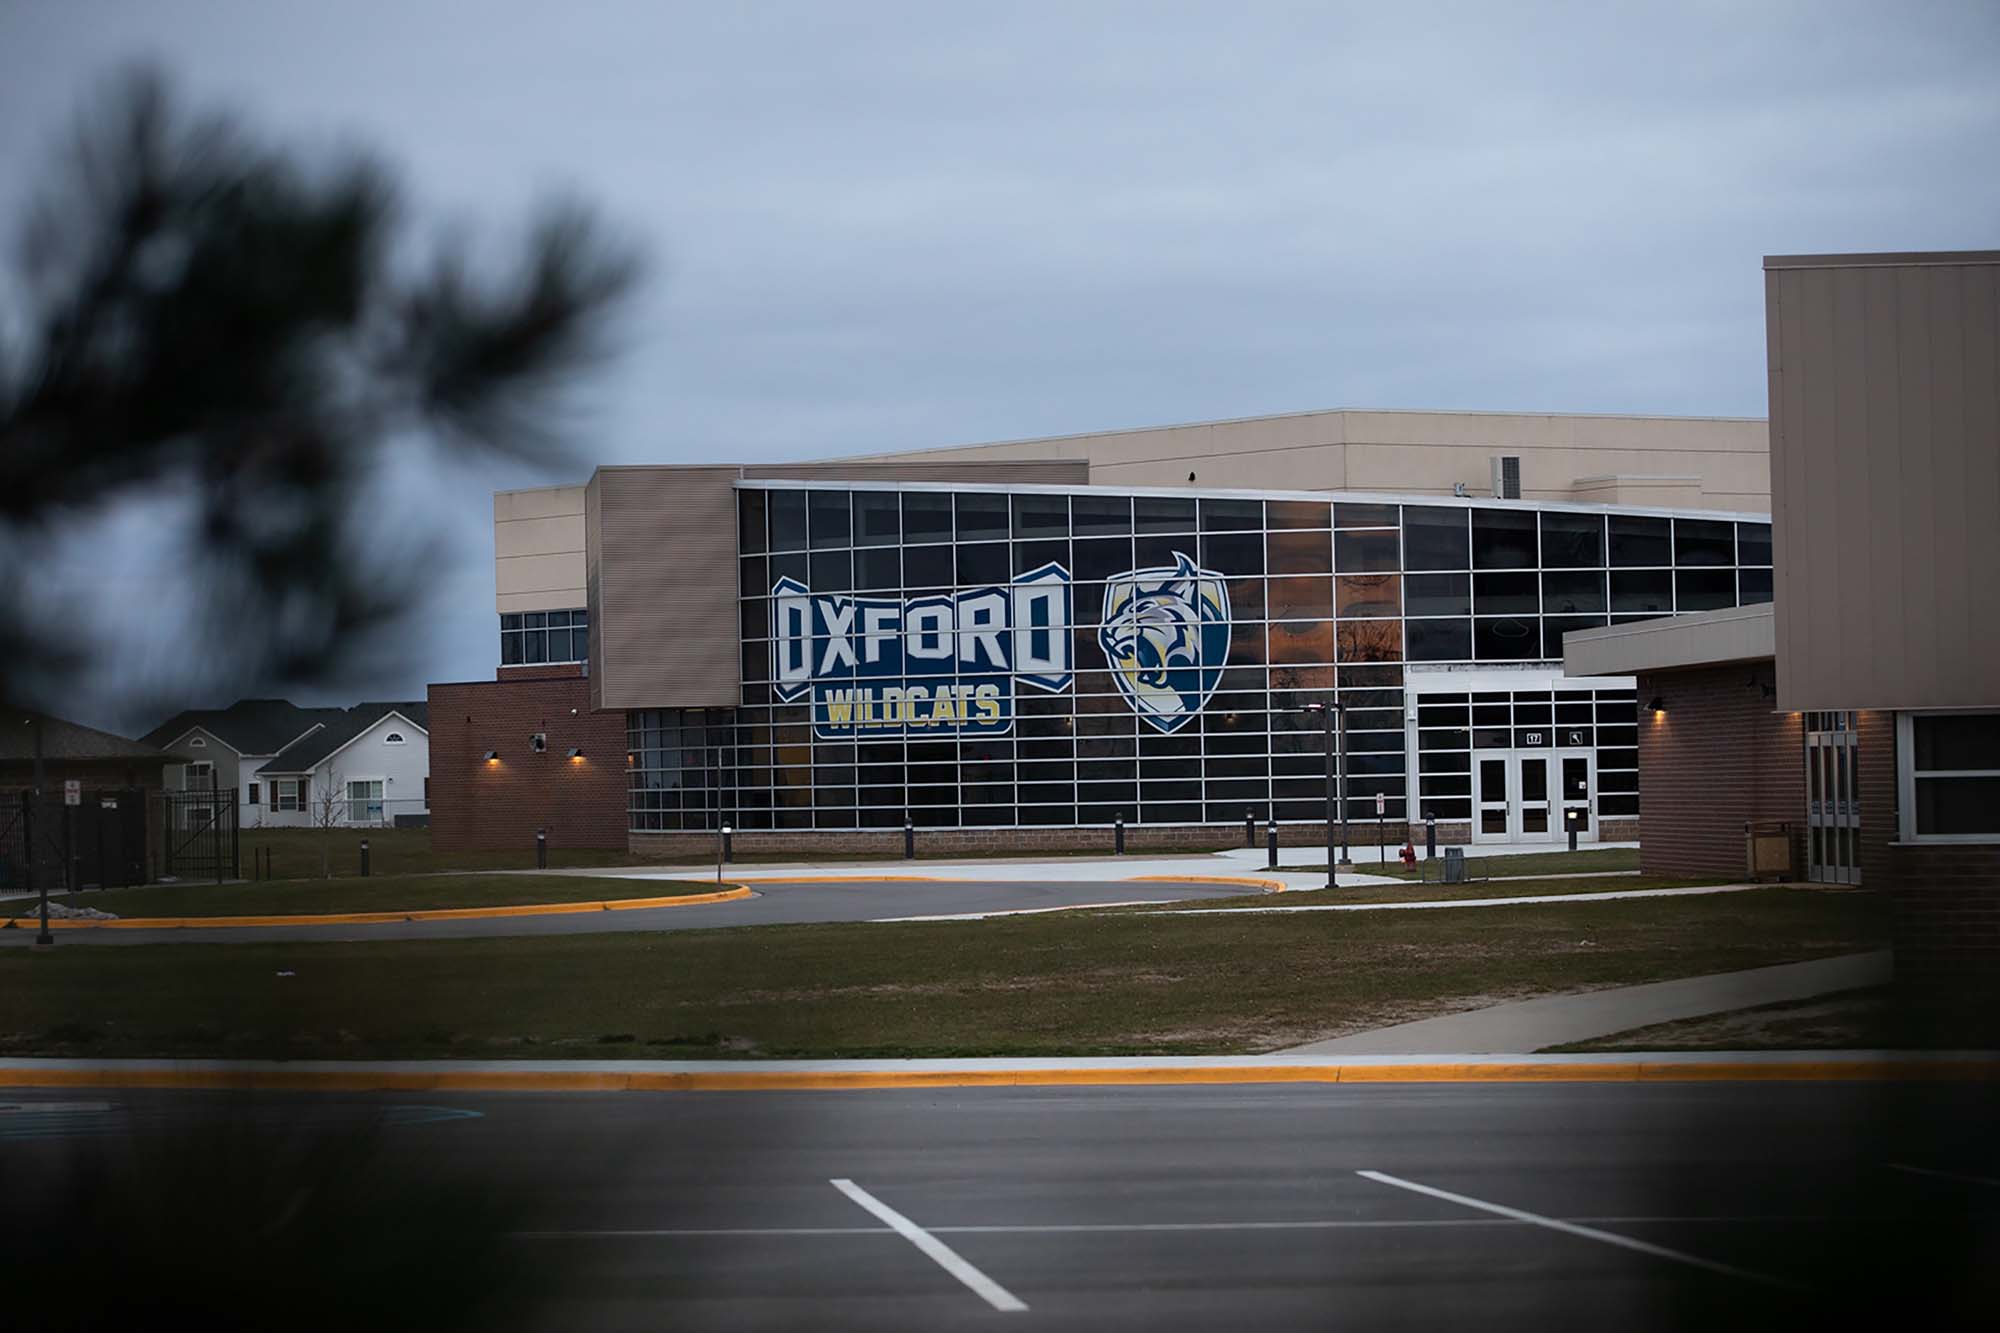 An exterior view of Oxford High School on Dec. 7, 2021, in Oxford, Michigan, where four students were killed and seven others injured a week before after student Ethan Crumbley allegedly opened fire with a pistol at the school.